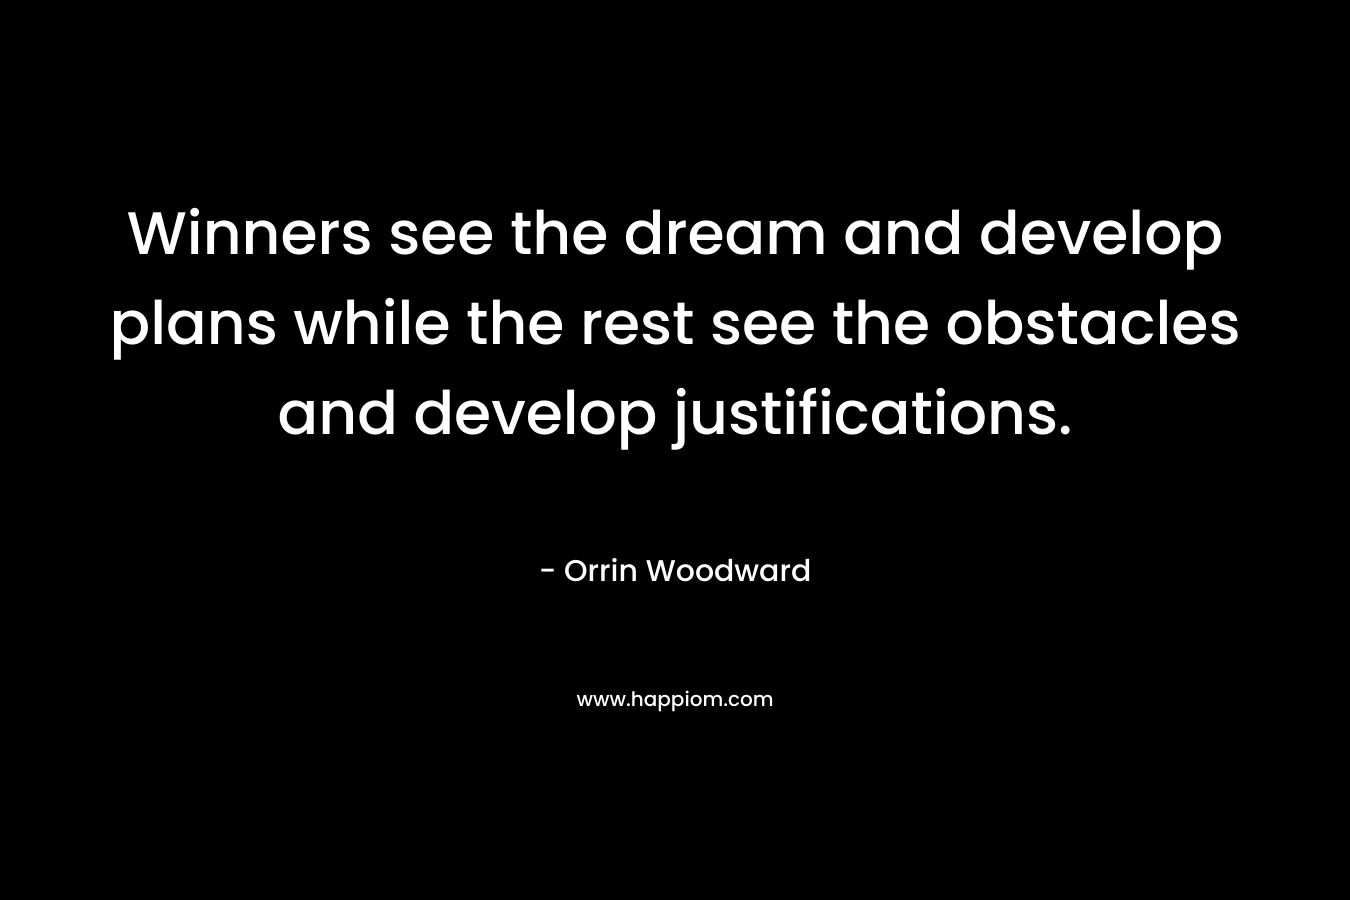 Winners see the dream and develop plans while the rest see the obstacles and develop justifications.